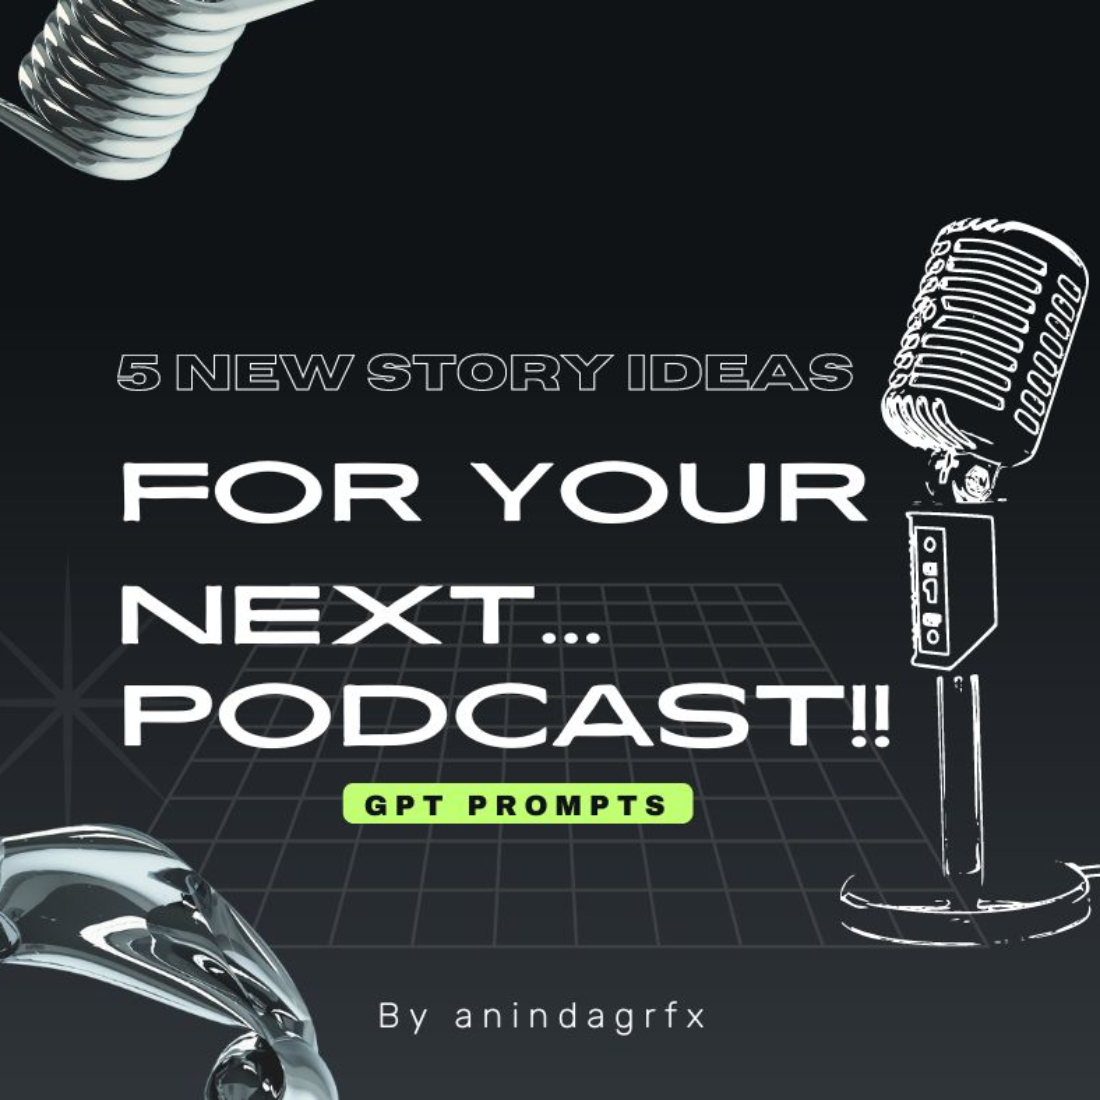 5 New Story Ideas for your next podcast GPT prompts cover image.